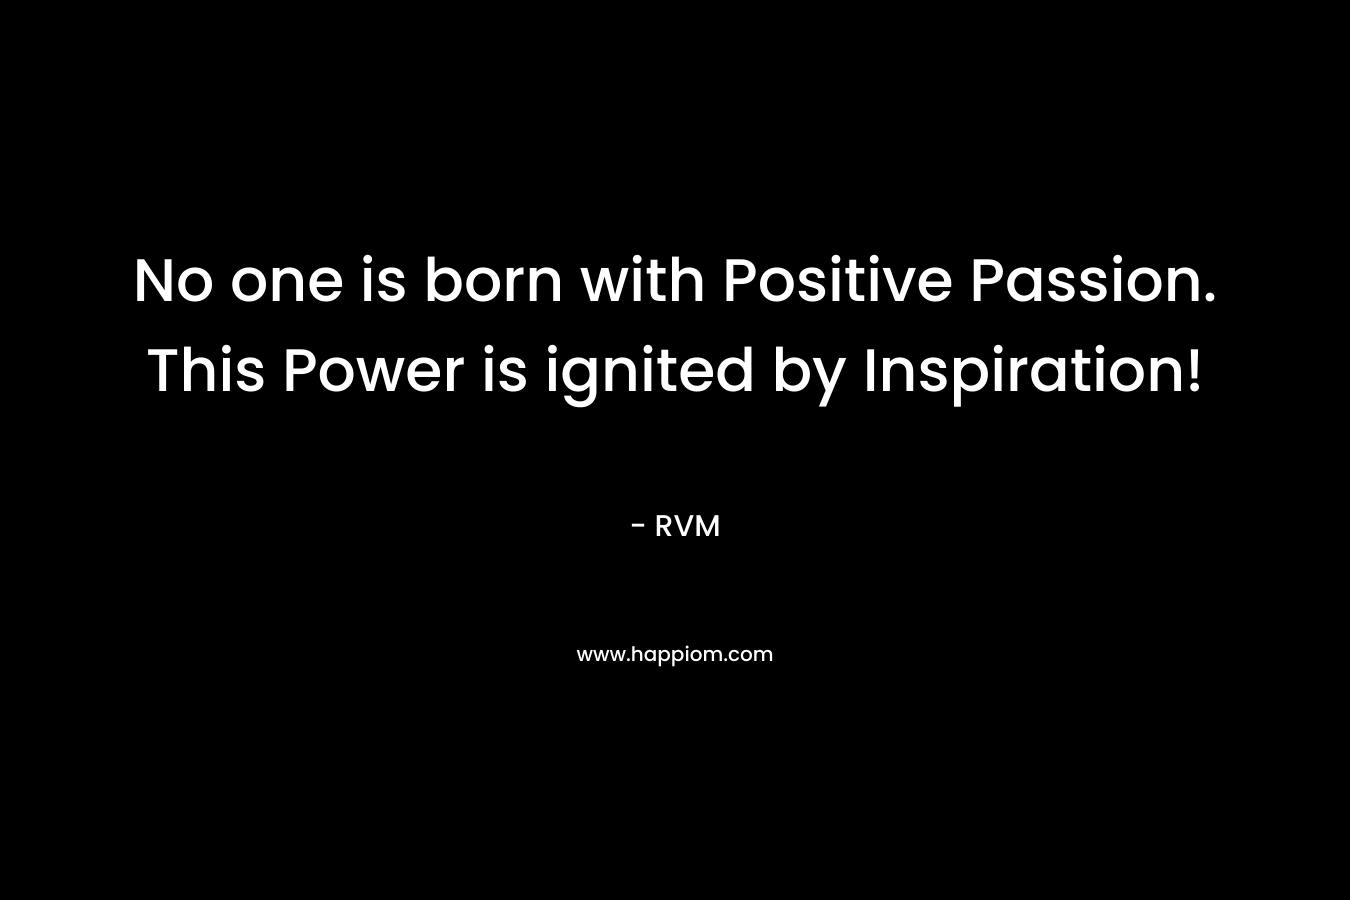 No one is born with Positive Passion. This Power is ignited by Inspiration!